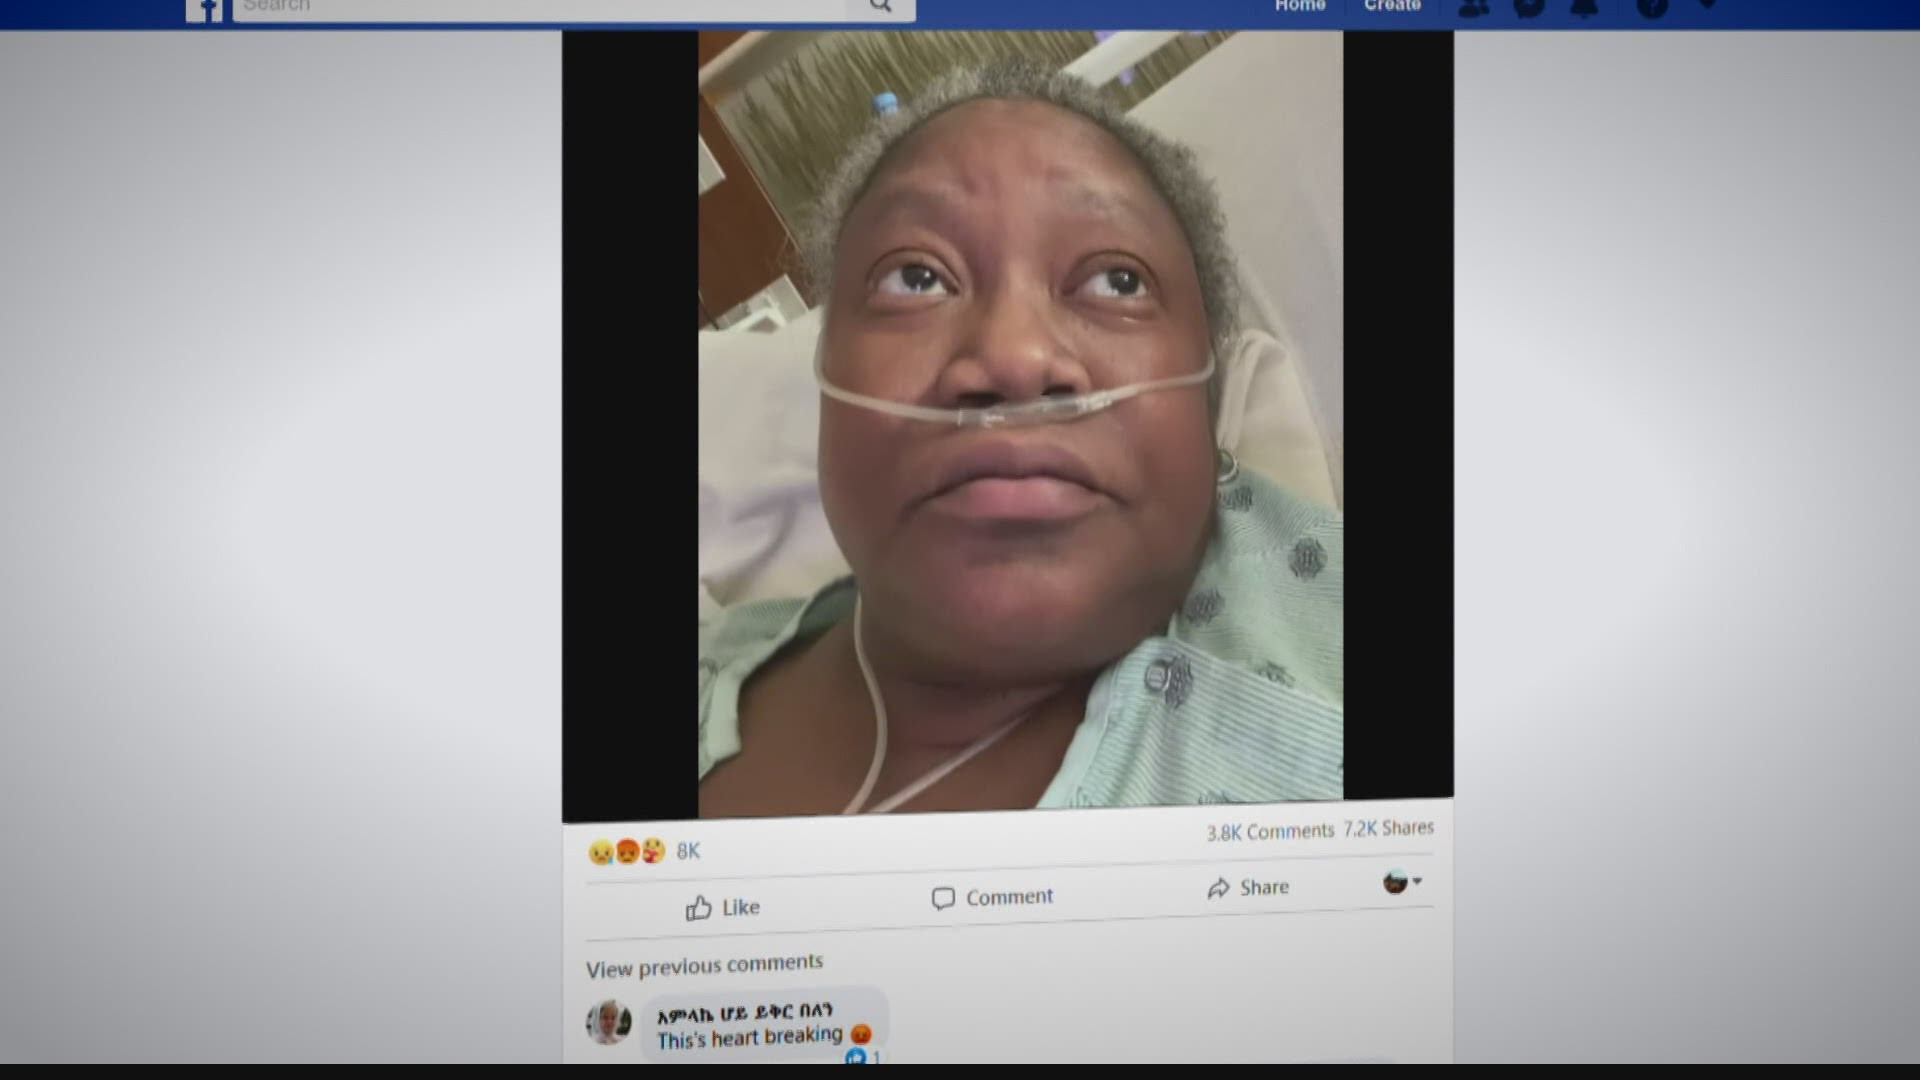 Video of a local doctor suffering from COVID-19 and claiming mistreatment from her hospital bed has gone viral.